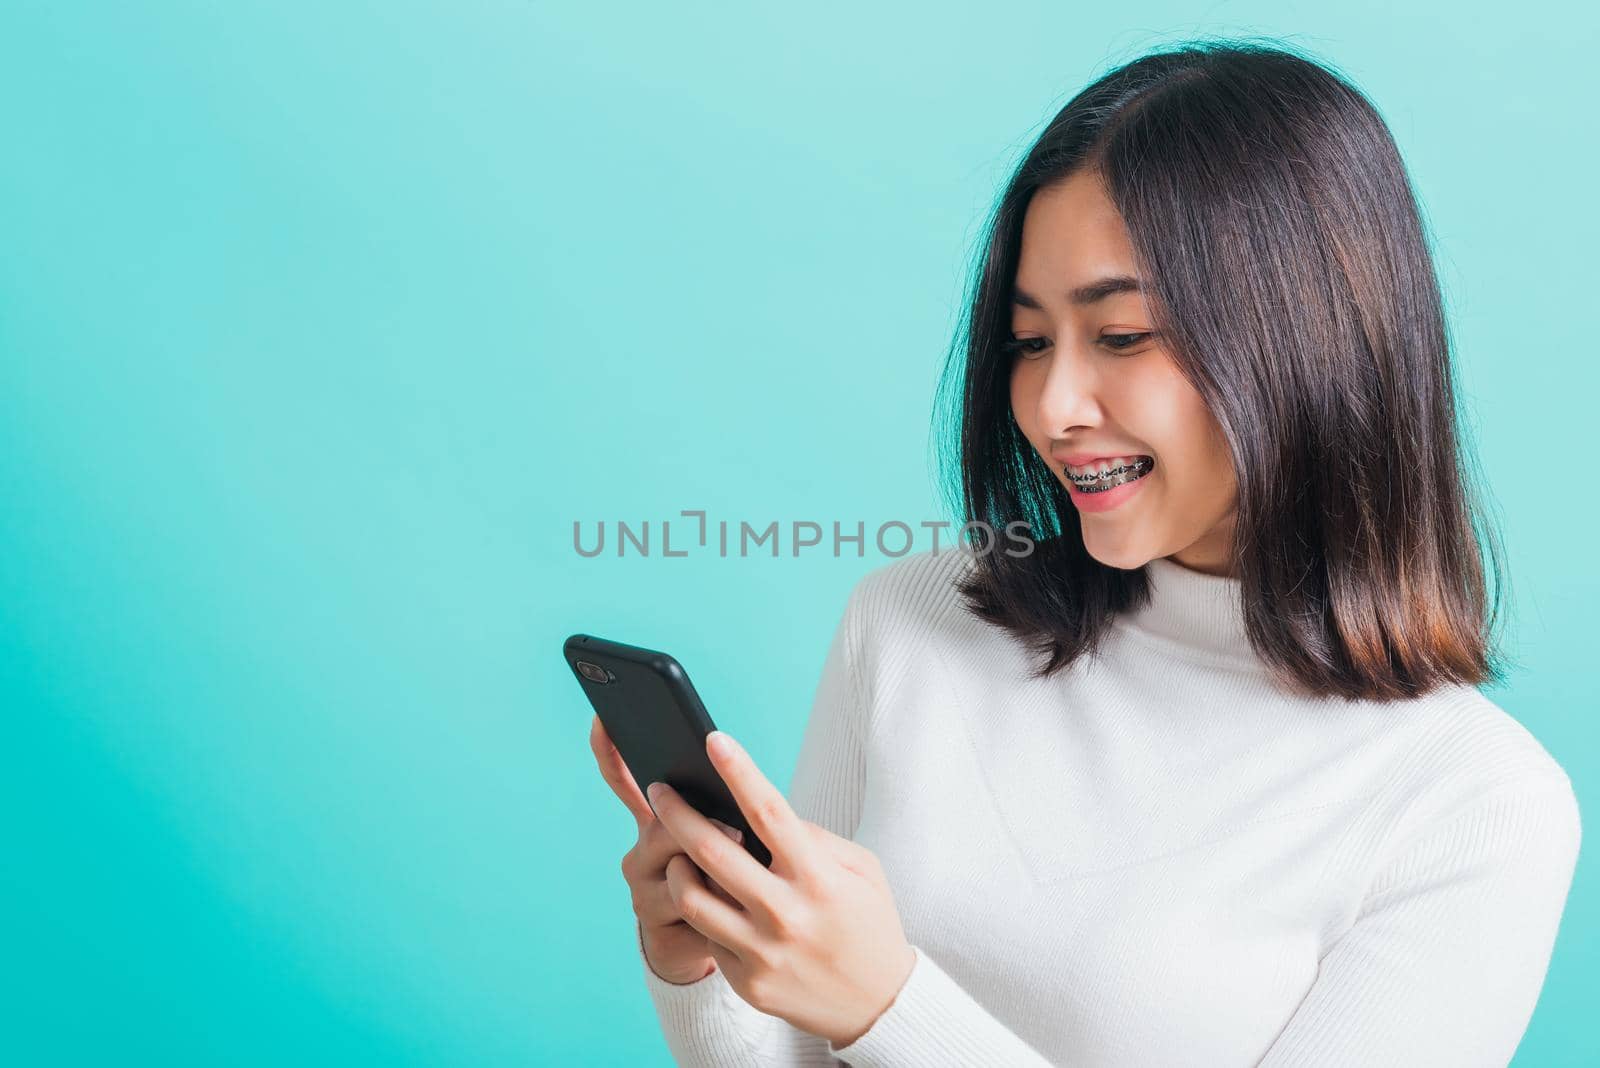 Portrait of Asian woman smile she holding and typing text message on a smartphone, female excited cheerful her reading mobile phone some social media isolated on a blue background, Technology concept